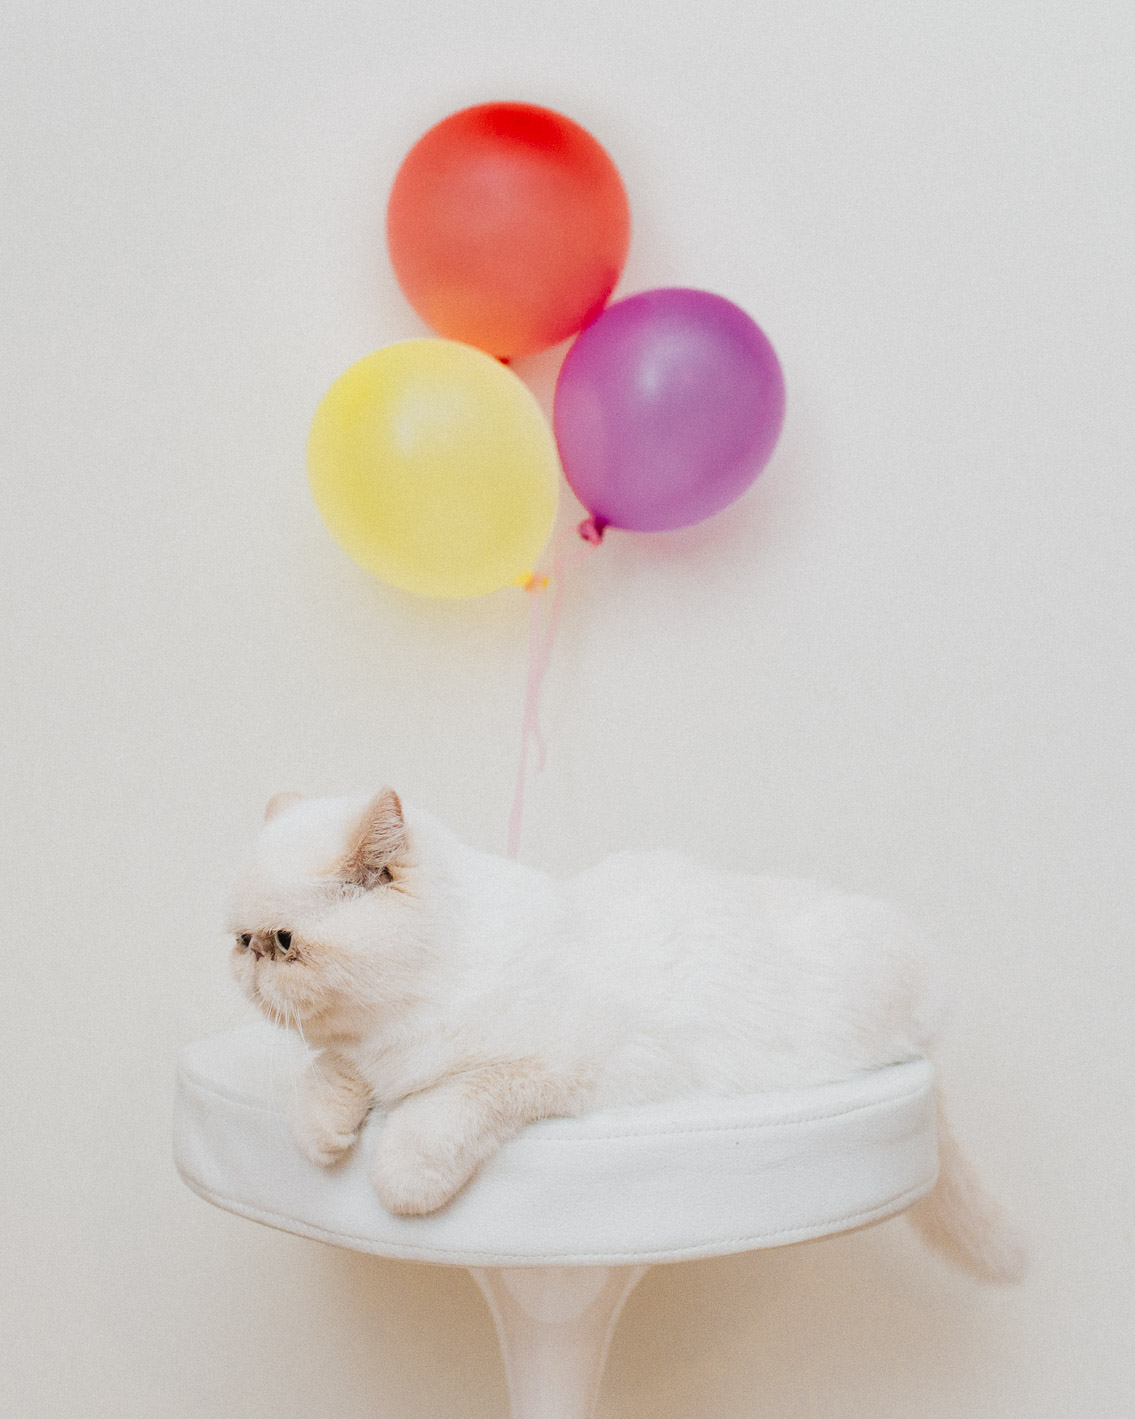 Juno balloons - The cat, you and us